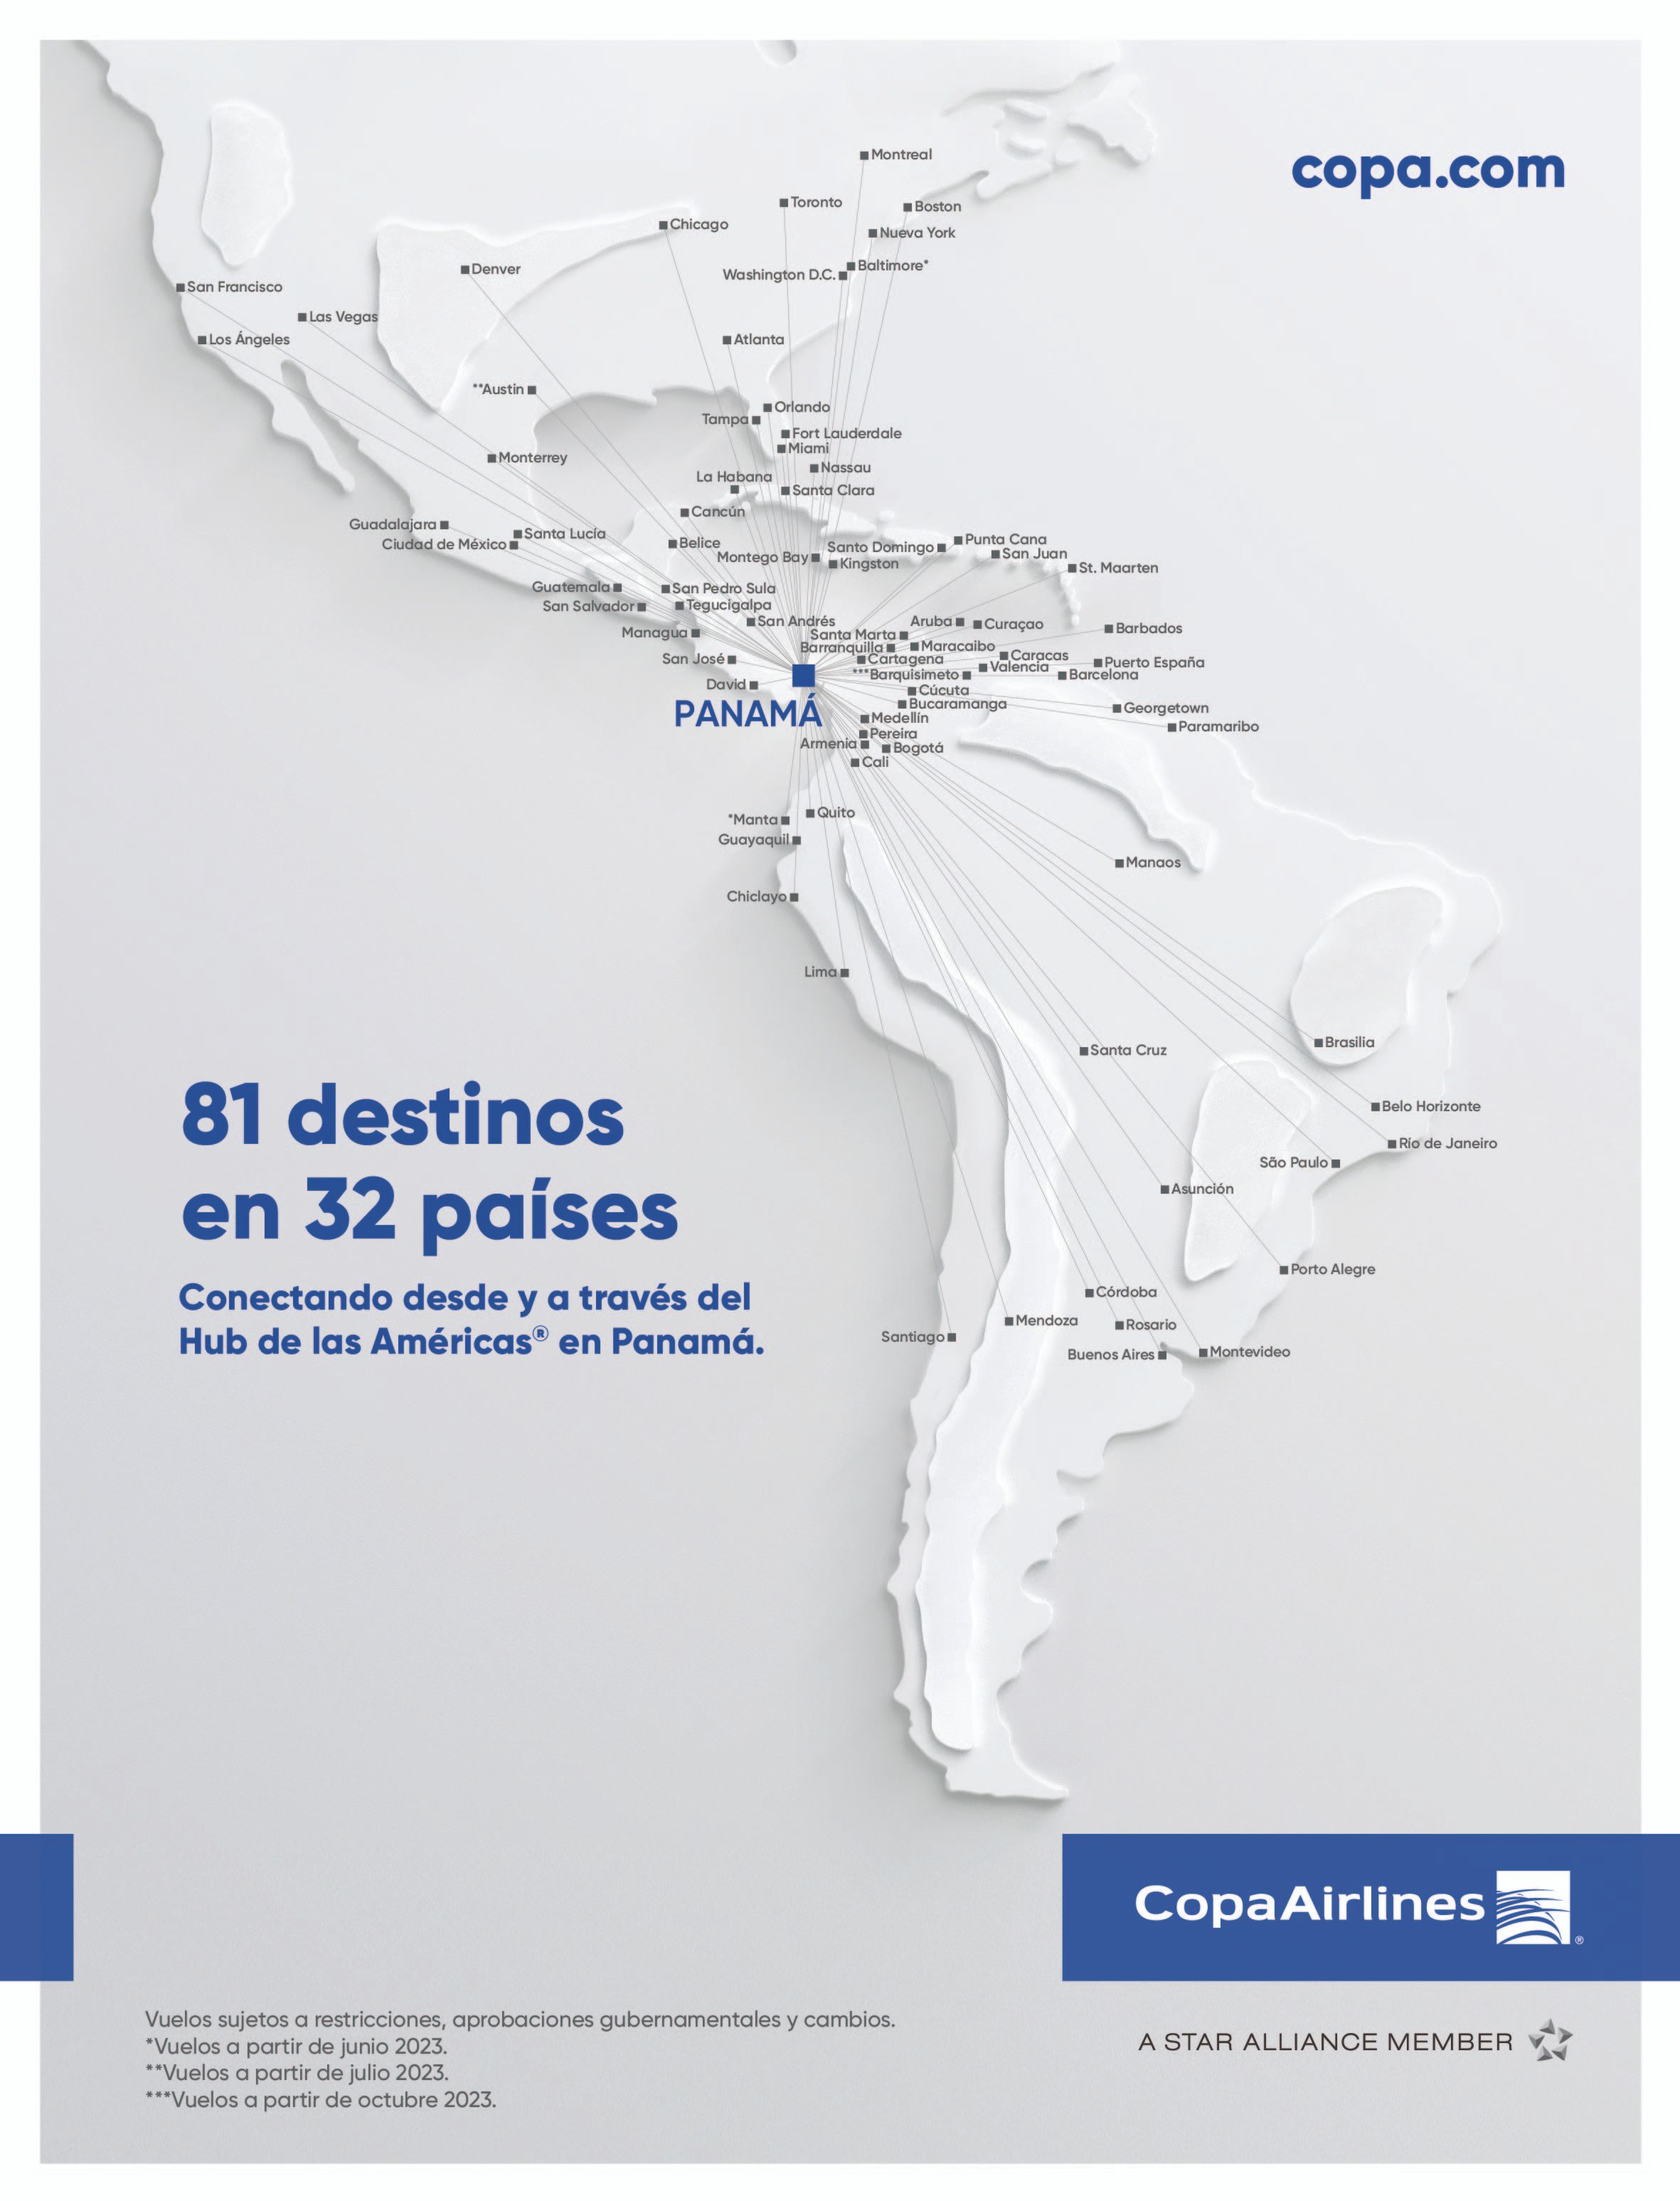 Copa Airlines Network Expands To 81 Destinations Across 32 Countries